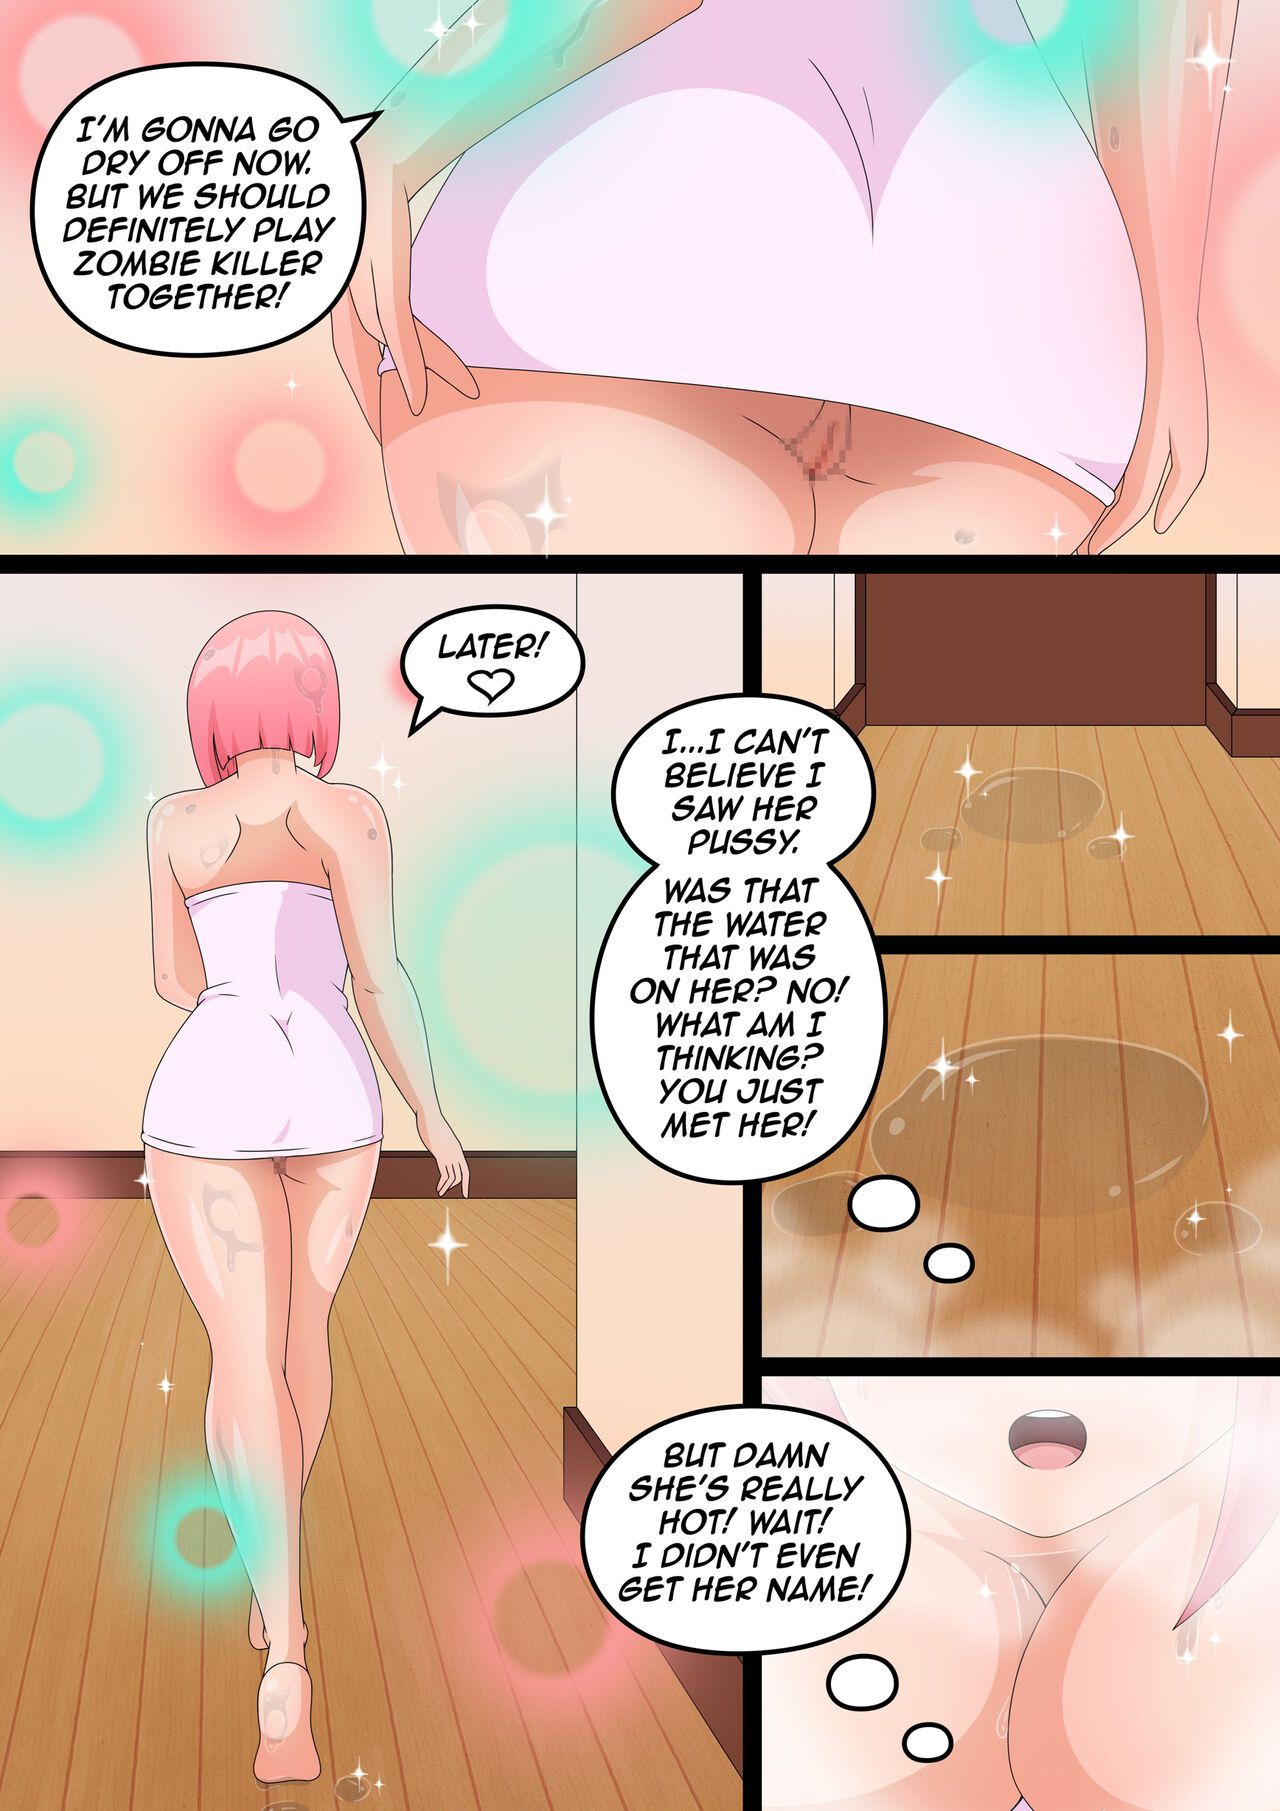 Zoey The Love Story [page 24 added] 9